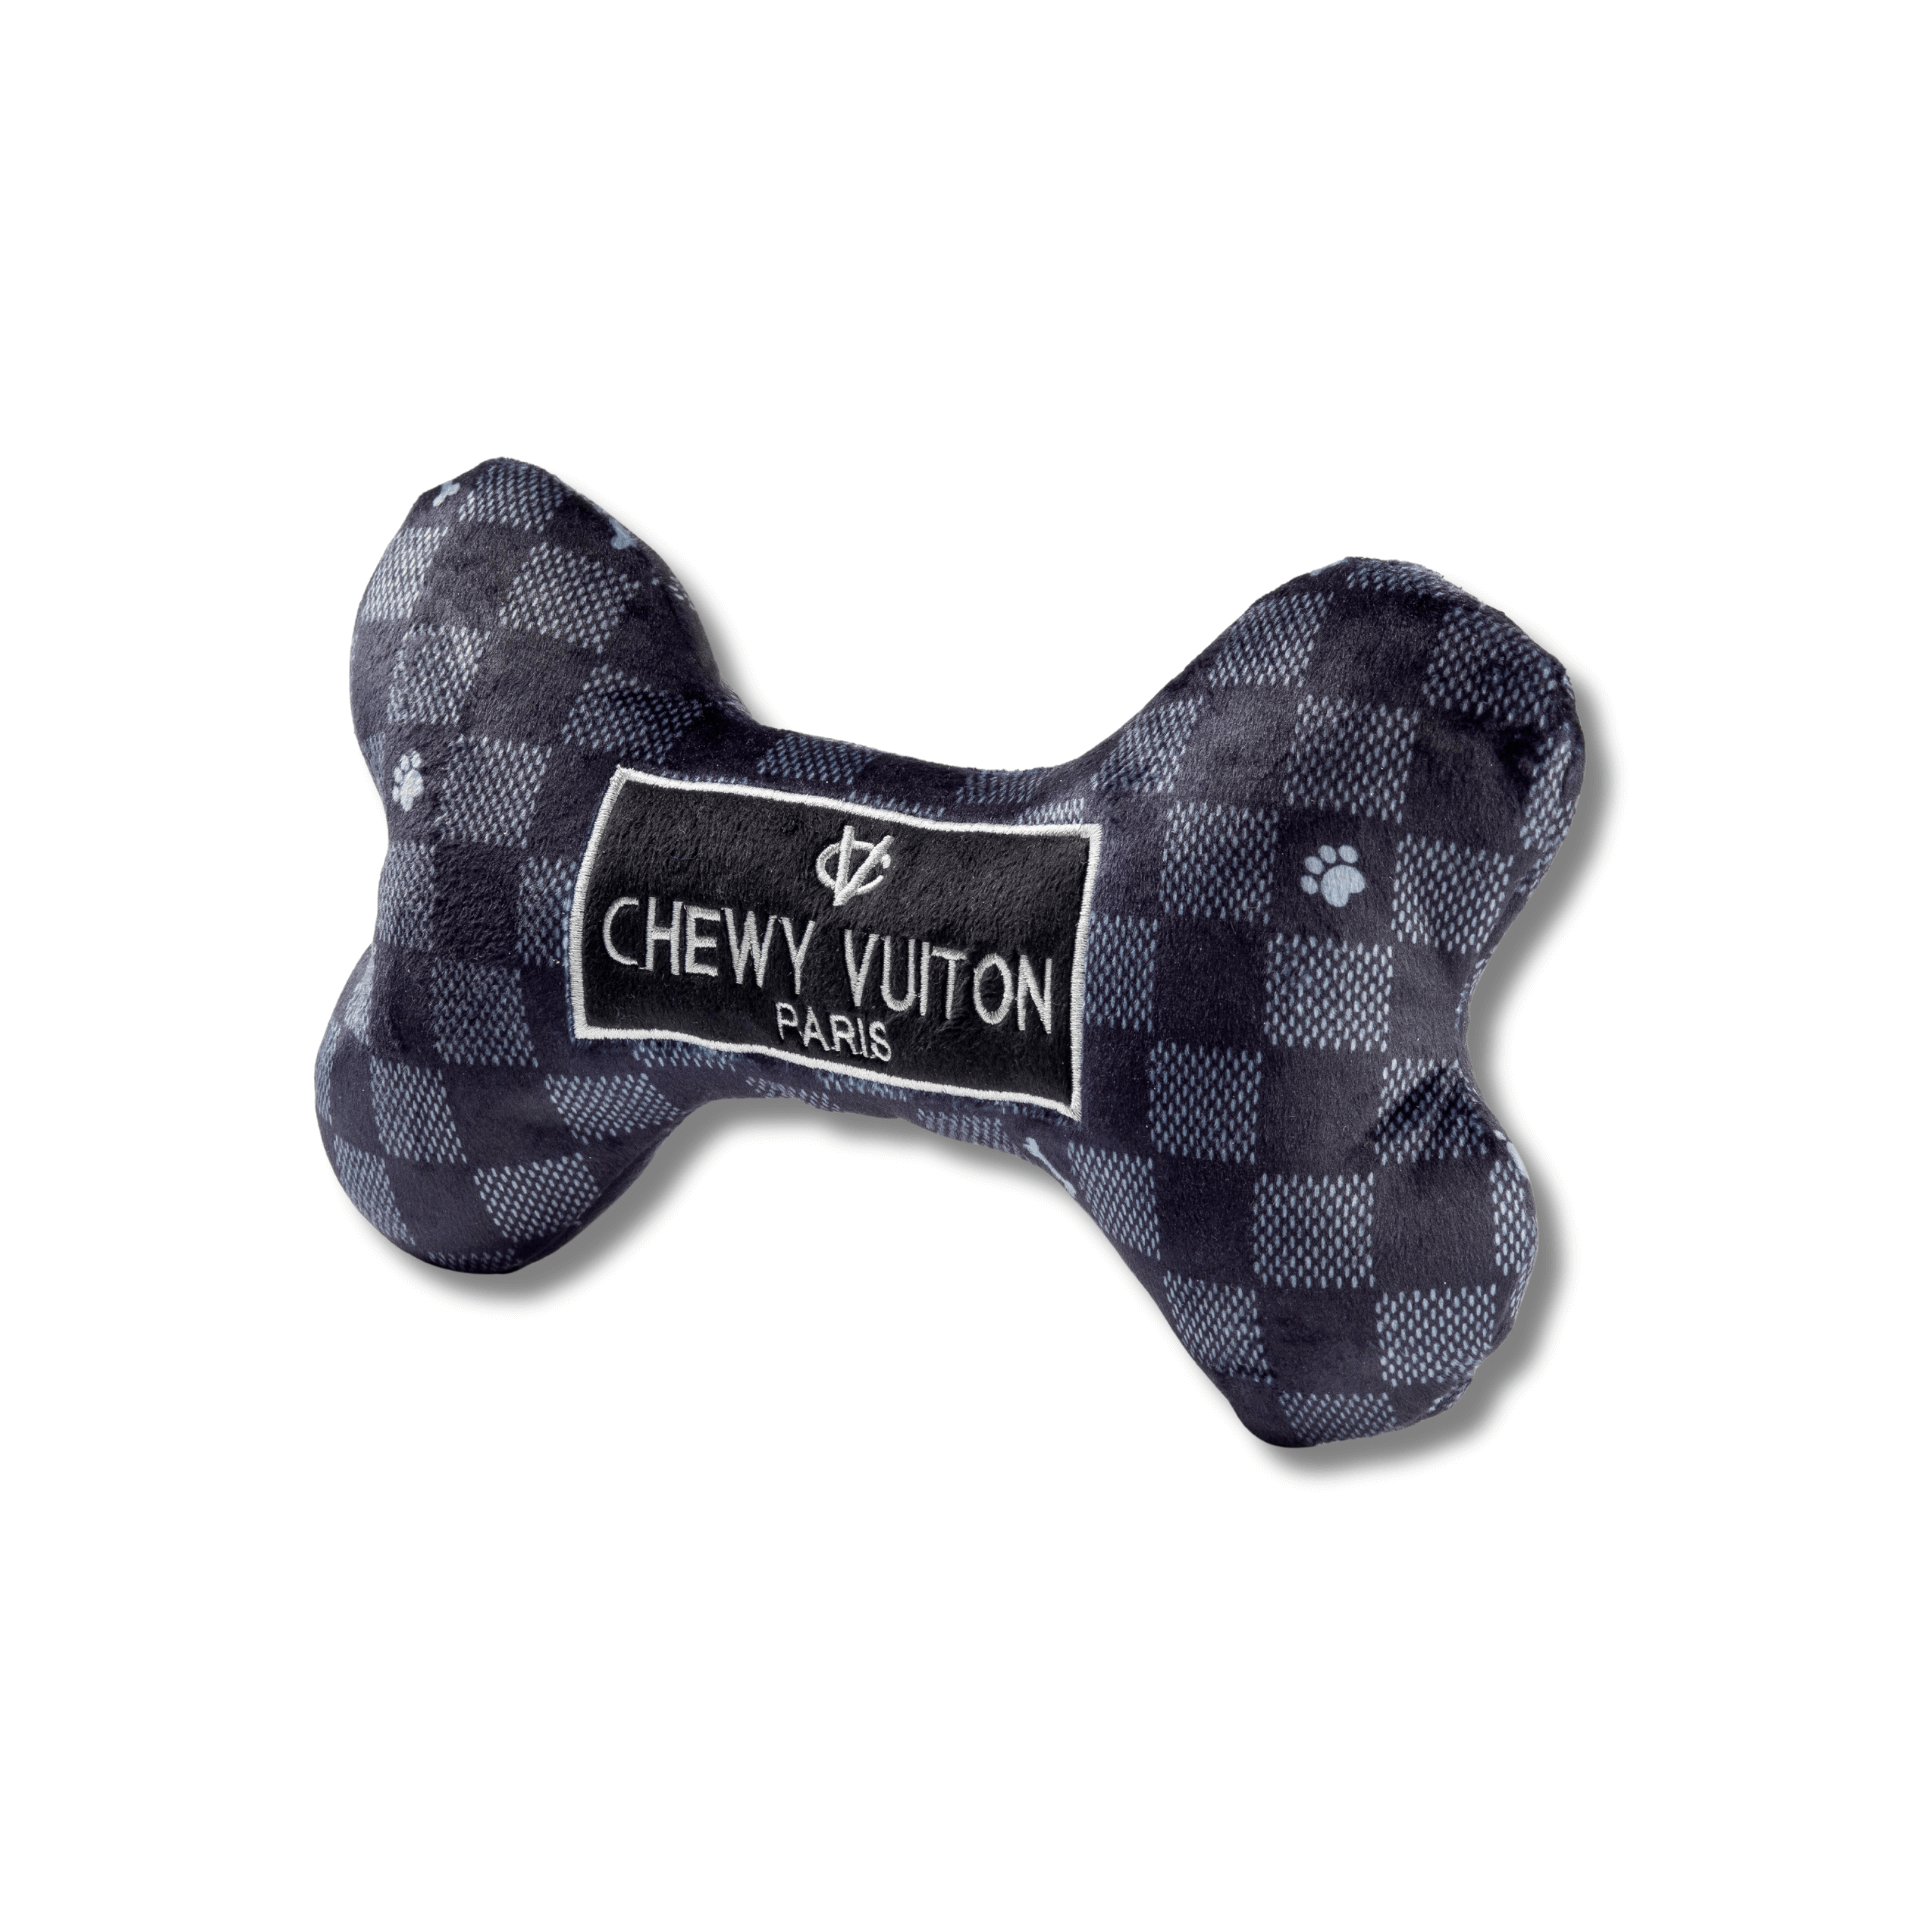 Chewy checkered black dog toy